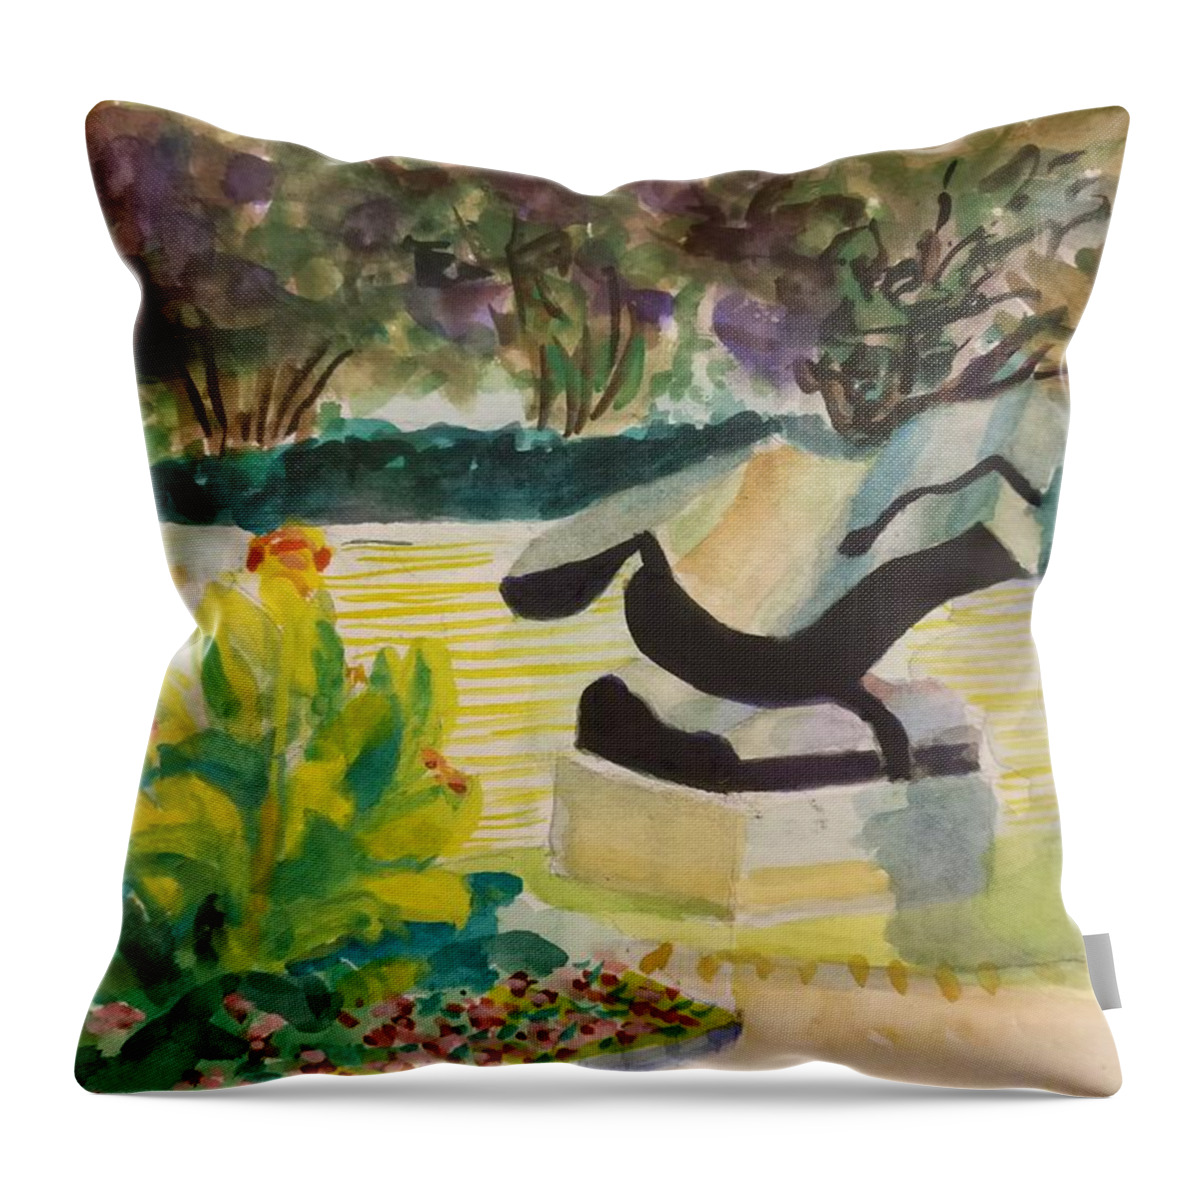 Architectural Throw Pillow featuring the painting The Corinthian Garden by Nicolas Bouteneff